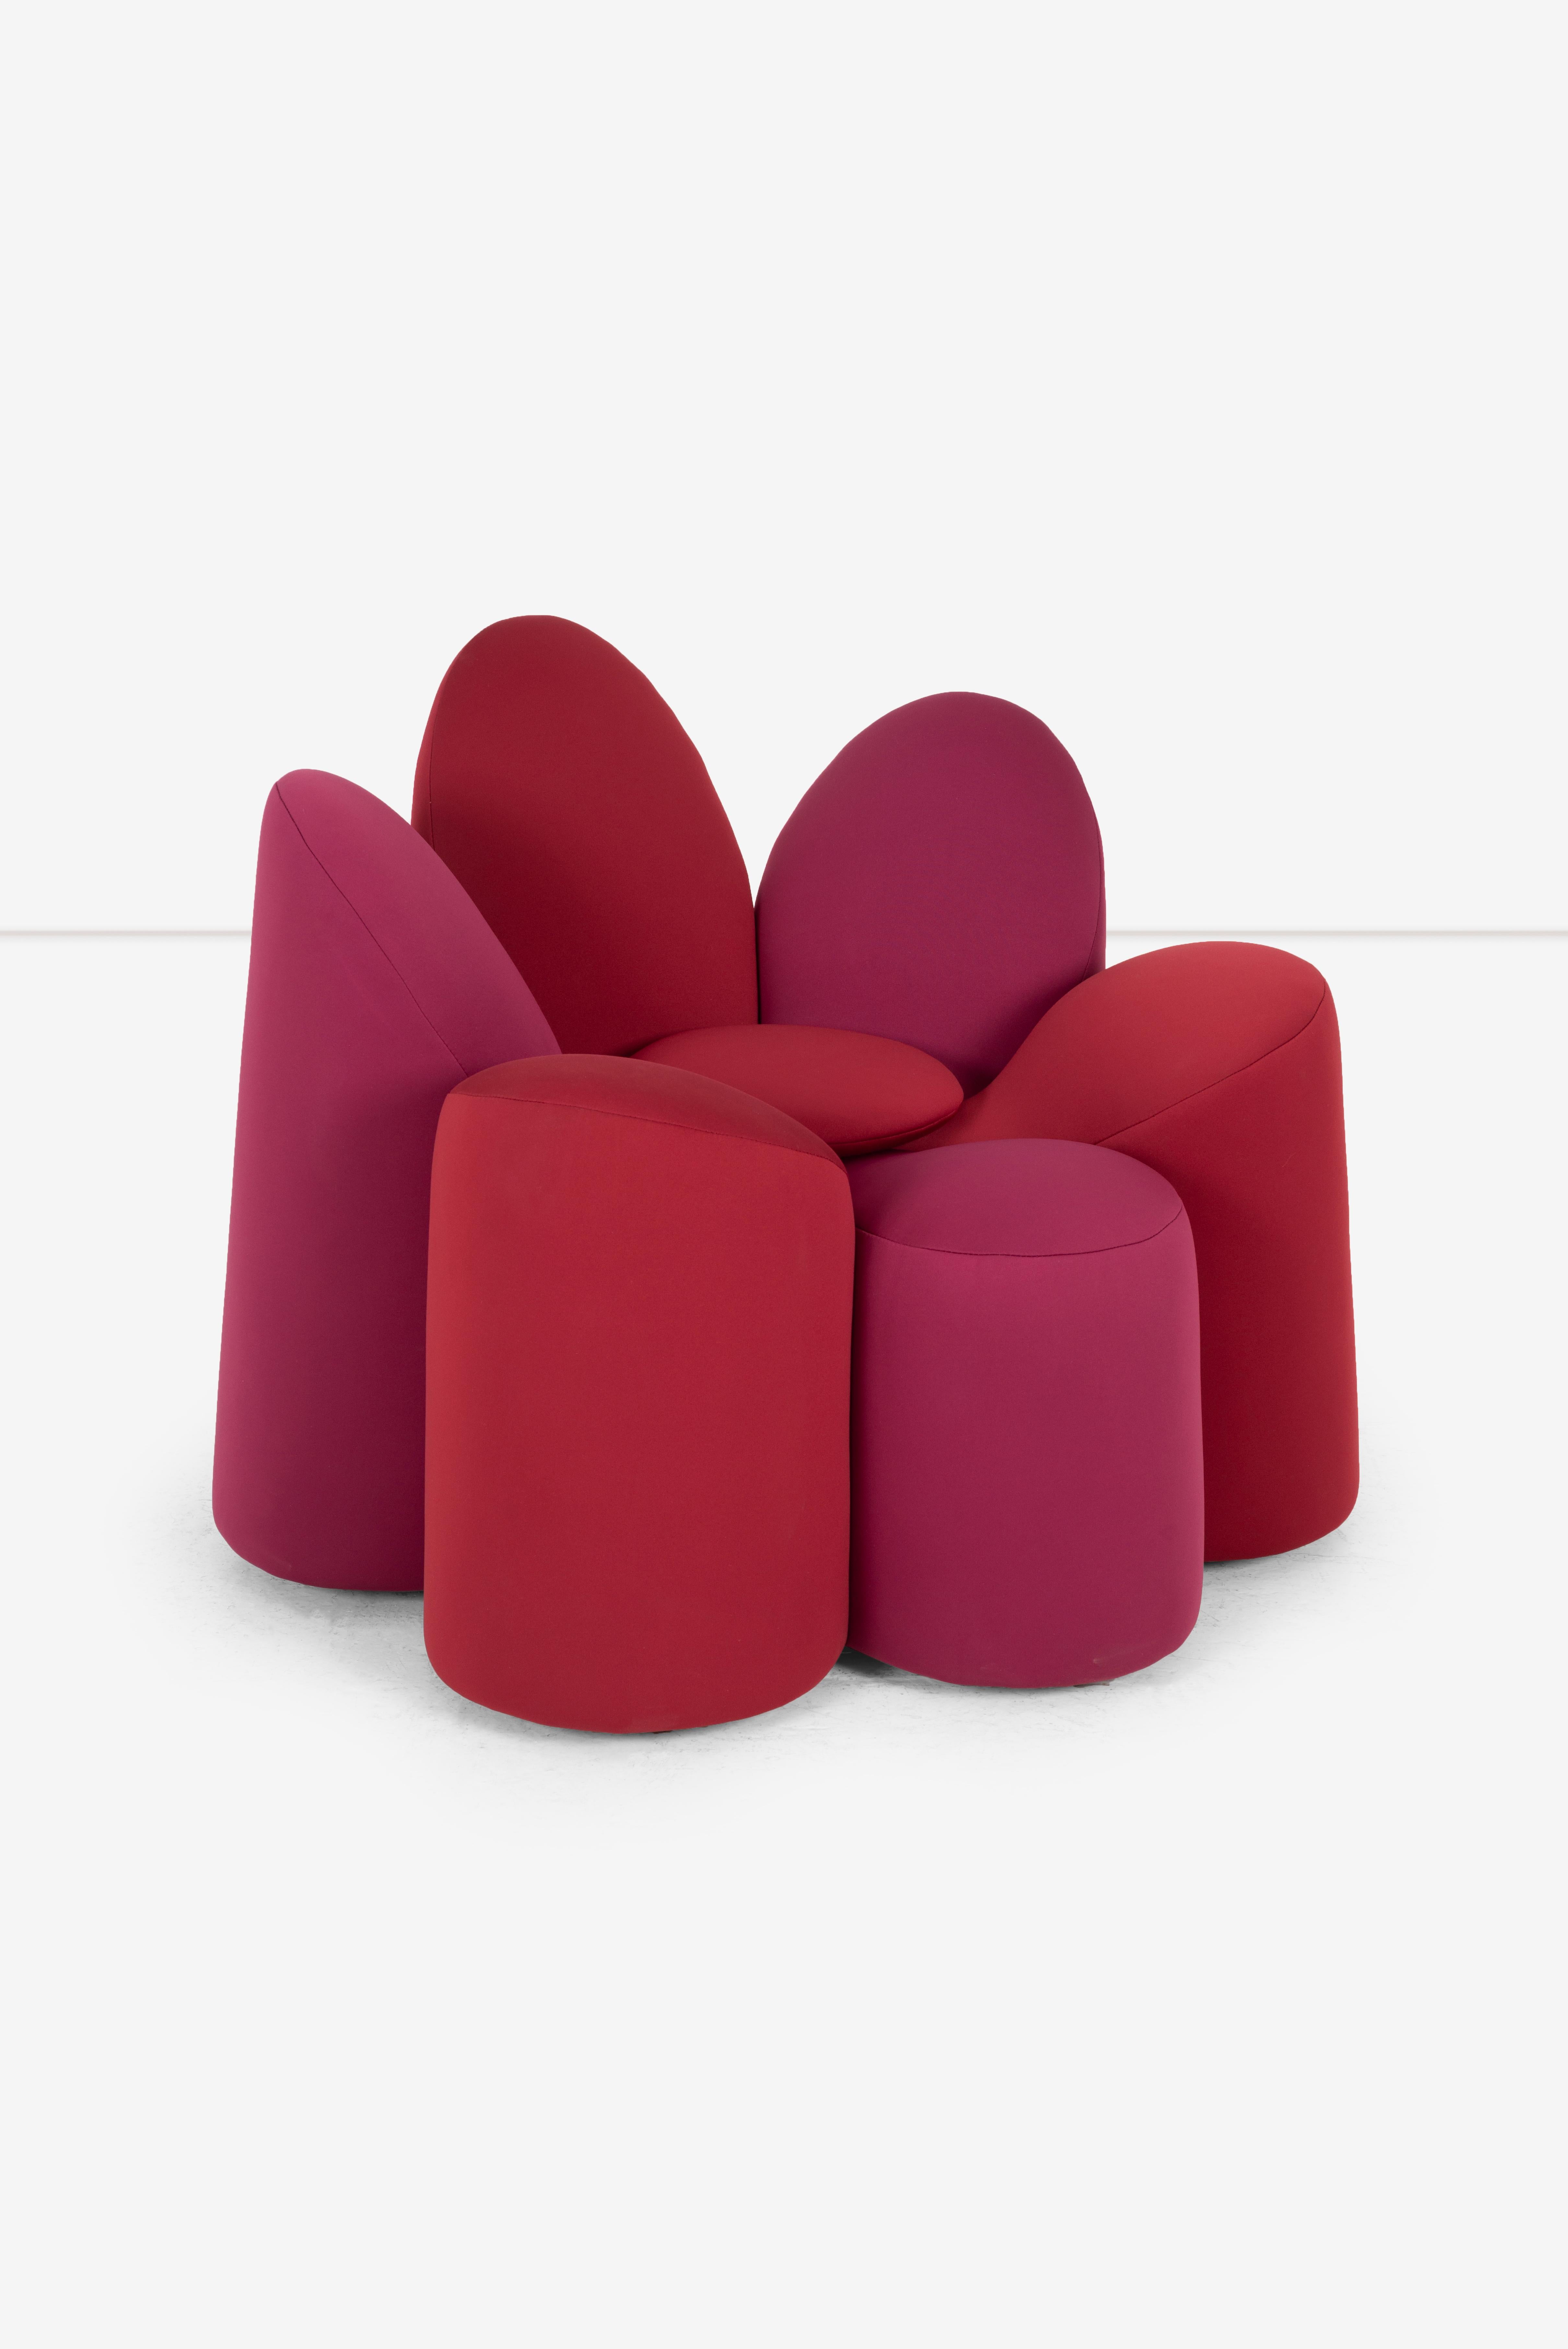 Mayflower Chair by Fabrice Berrux for Roche Bobois In Good Condition For Sale In Chicago, IL